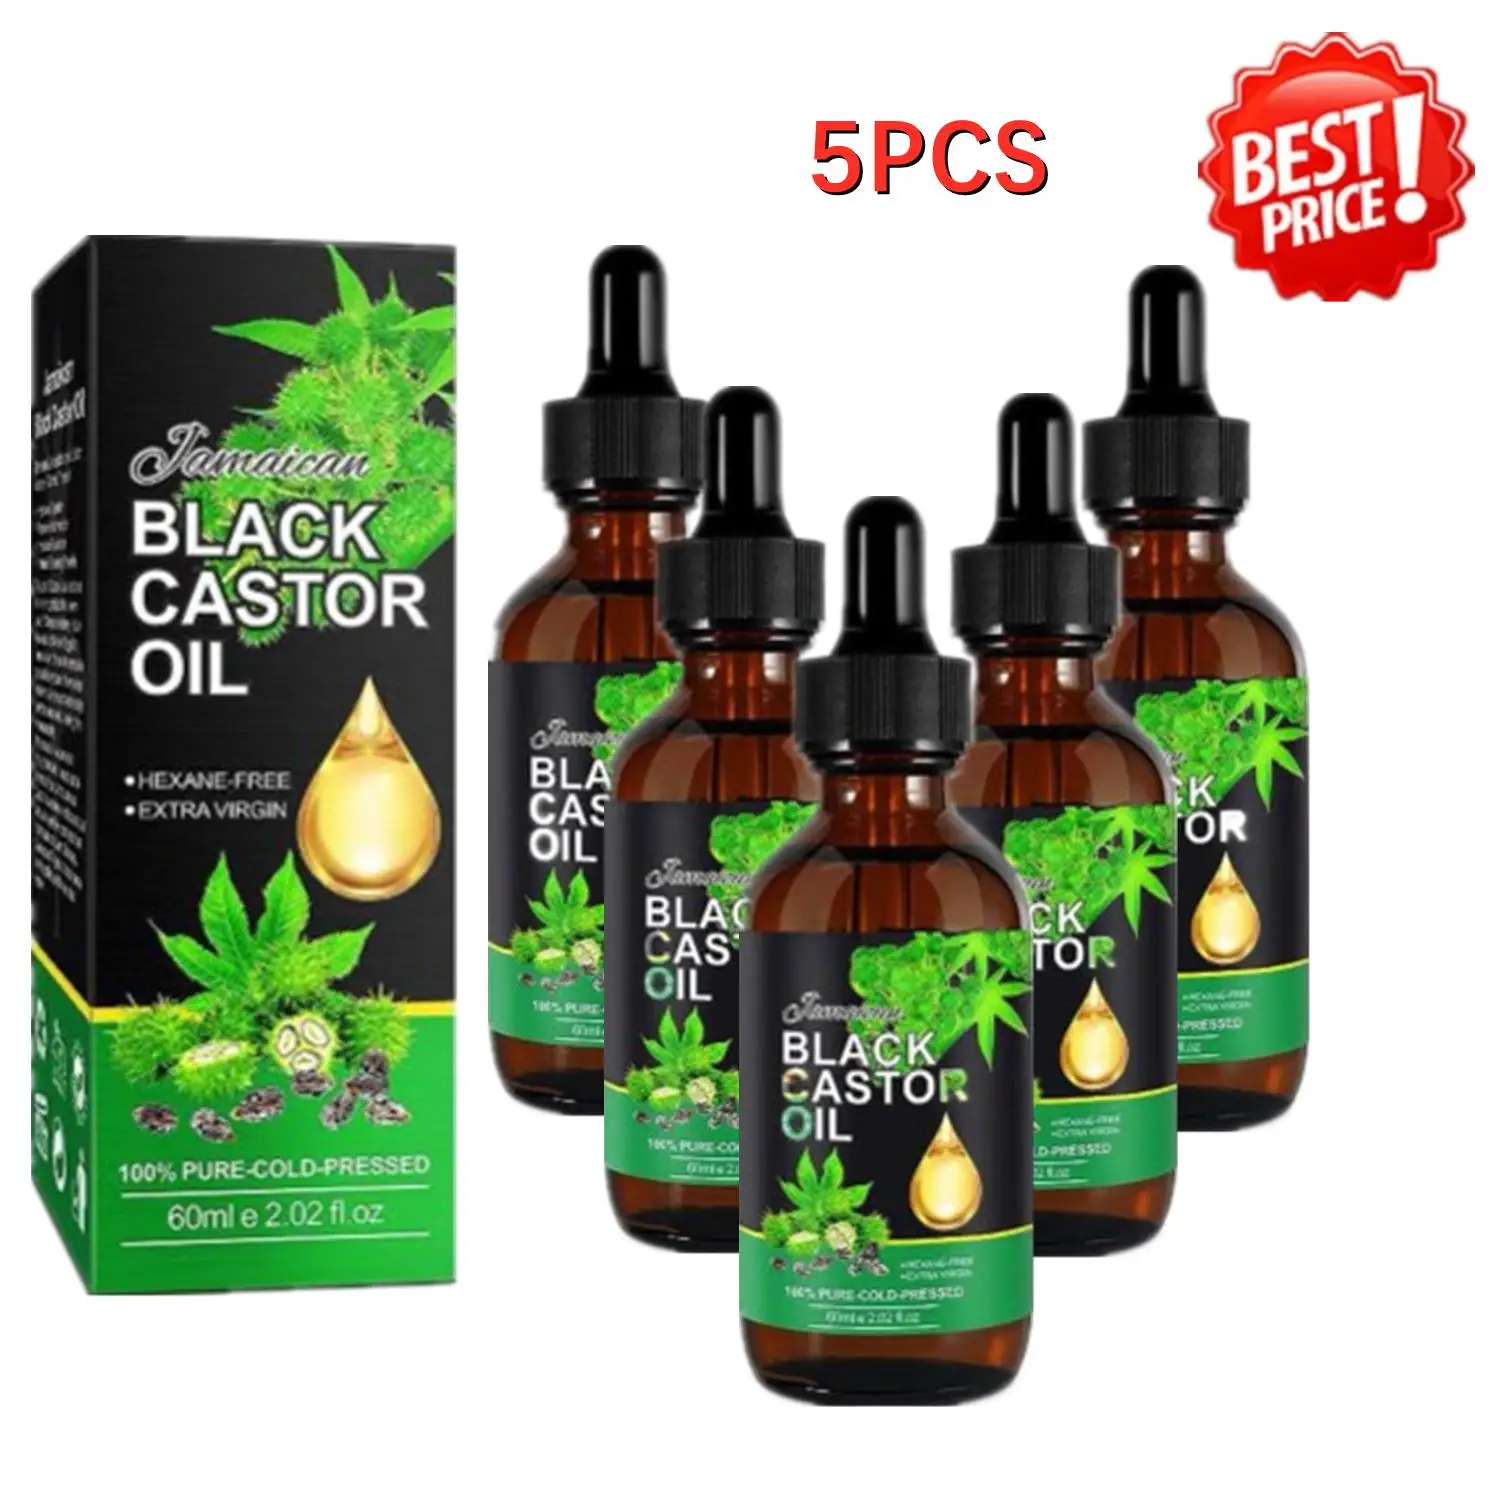 

5PCS Black Castor Oil Nourishes Skin Massage Essential Oil Eyebrows Growth Prevents Skin Aging Hair Care Products